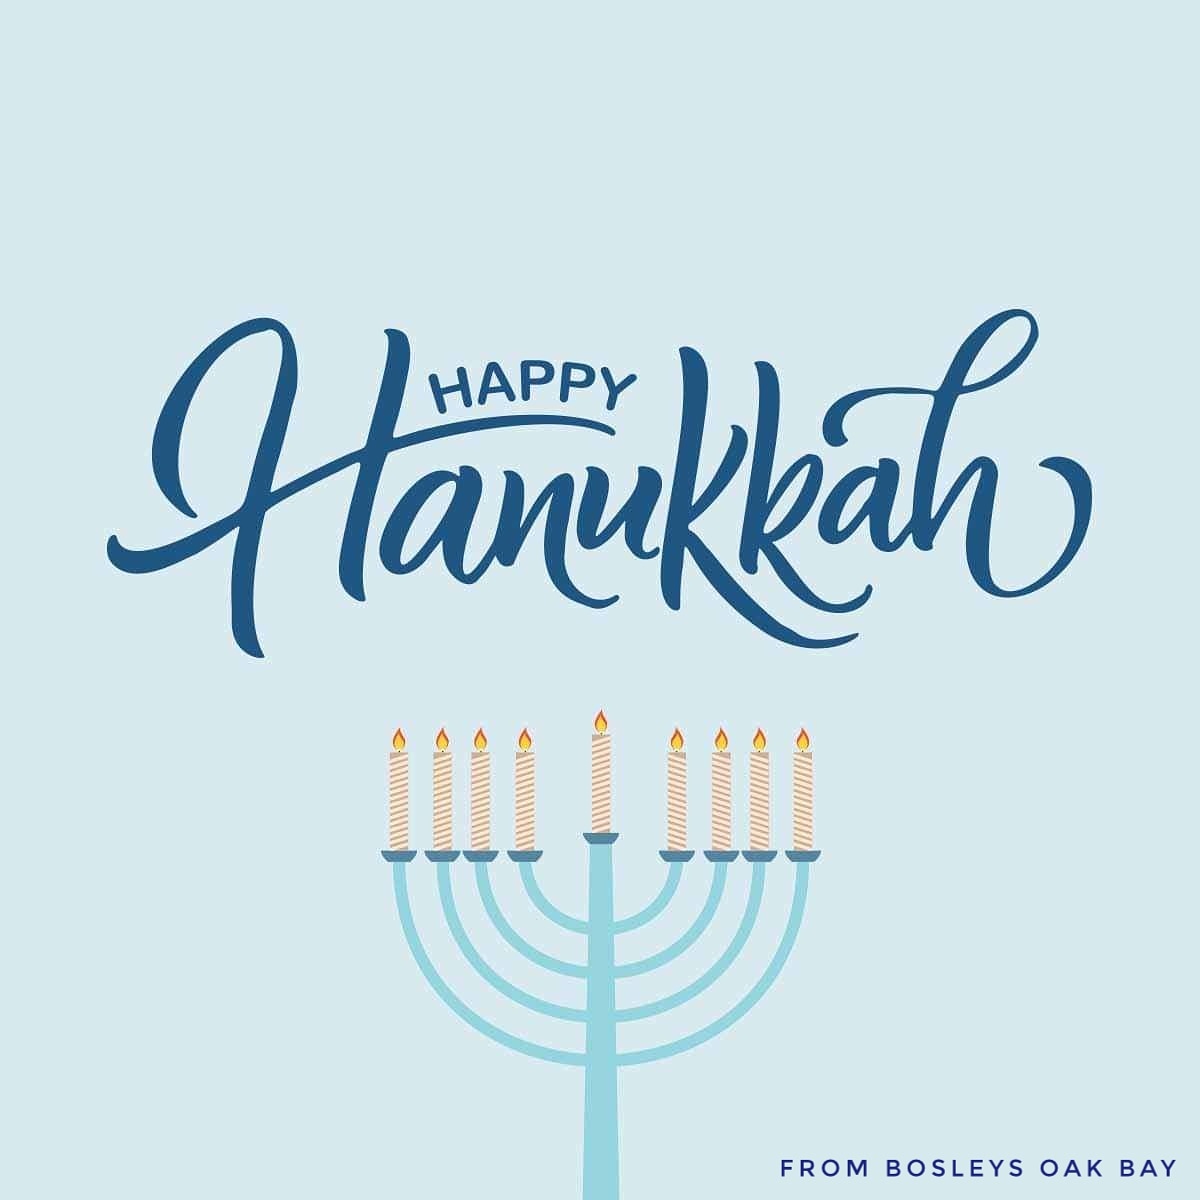 #Happy #Hanukkah #Wishing you and your families a season full of #warmth and #light from #BosleysOakBay #LocallyOwnedandOperated #shoplocalvictoria #shoplocalyyj #shoplocaloakbay #WeDeliver🚐🚙 #oakbaylocal #oakbayave #oakbayavenue #oakbaylife #oakbayvillage #oakbayvictoria